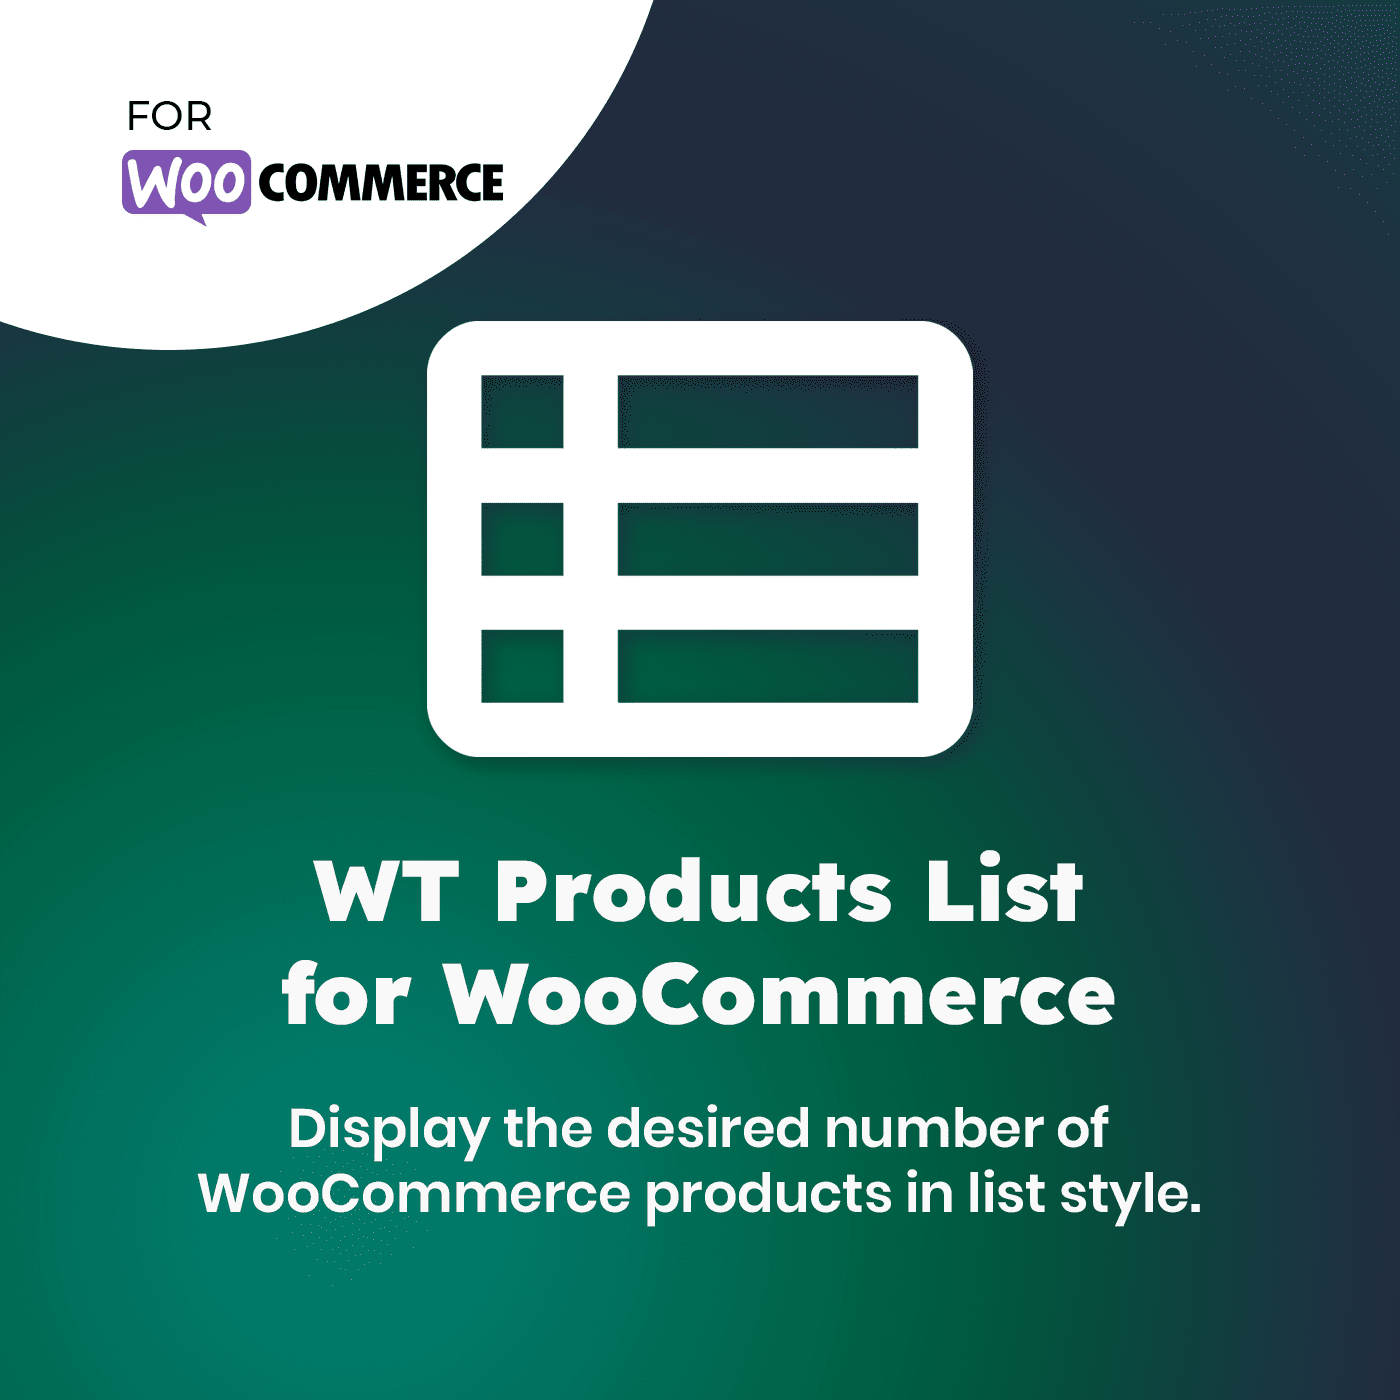 WT Products List for WooCommerce - WordPress Plugin for WooCommerce